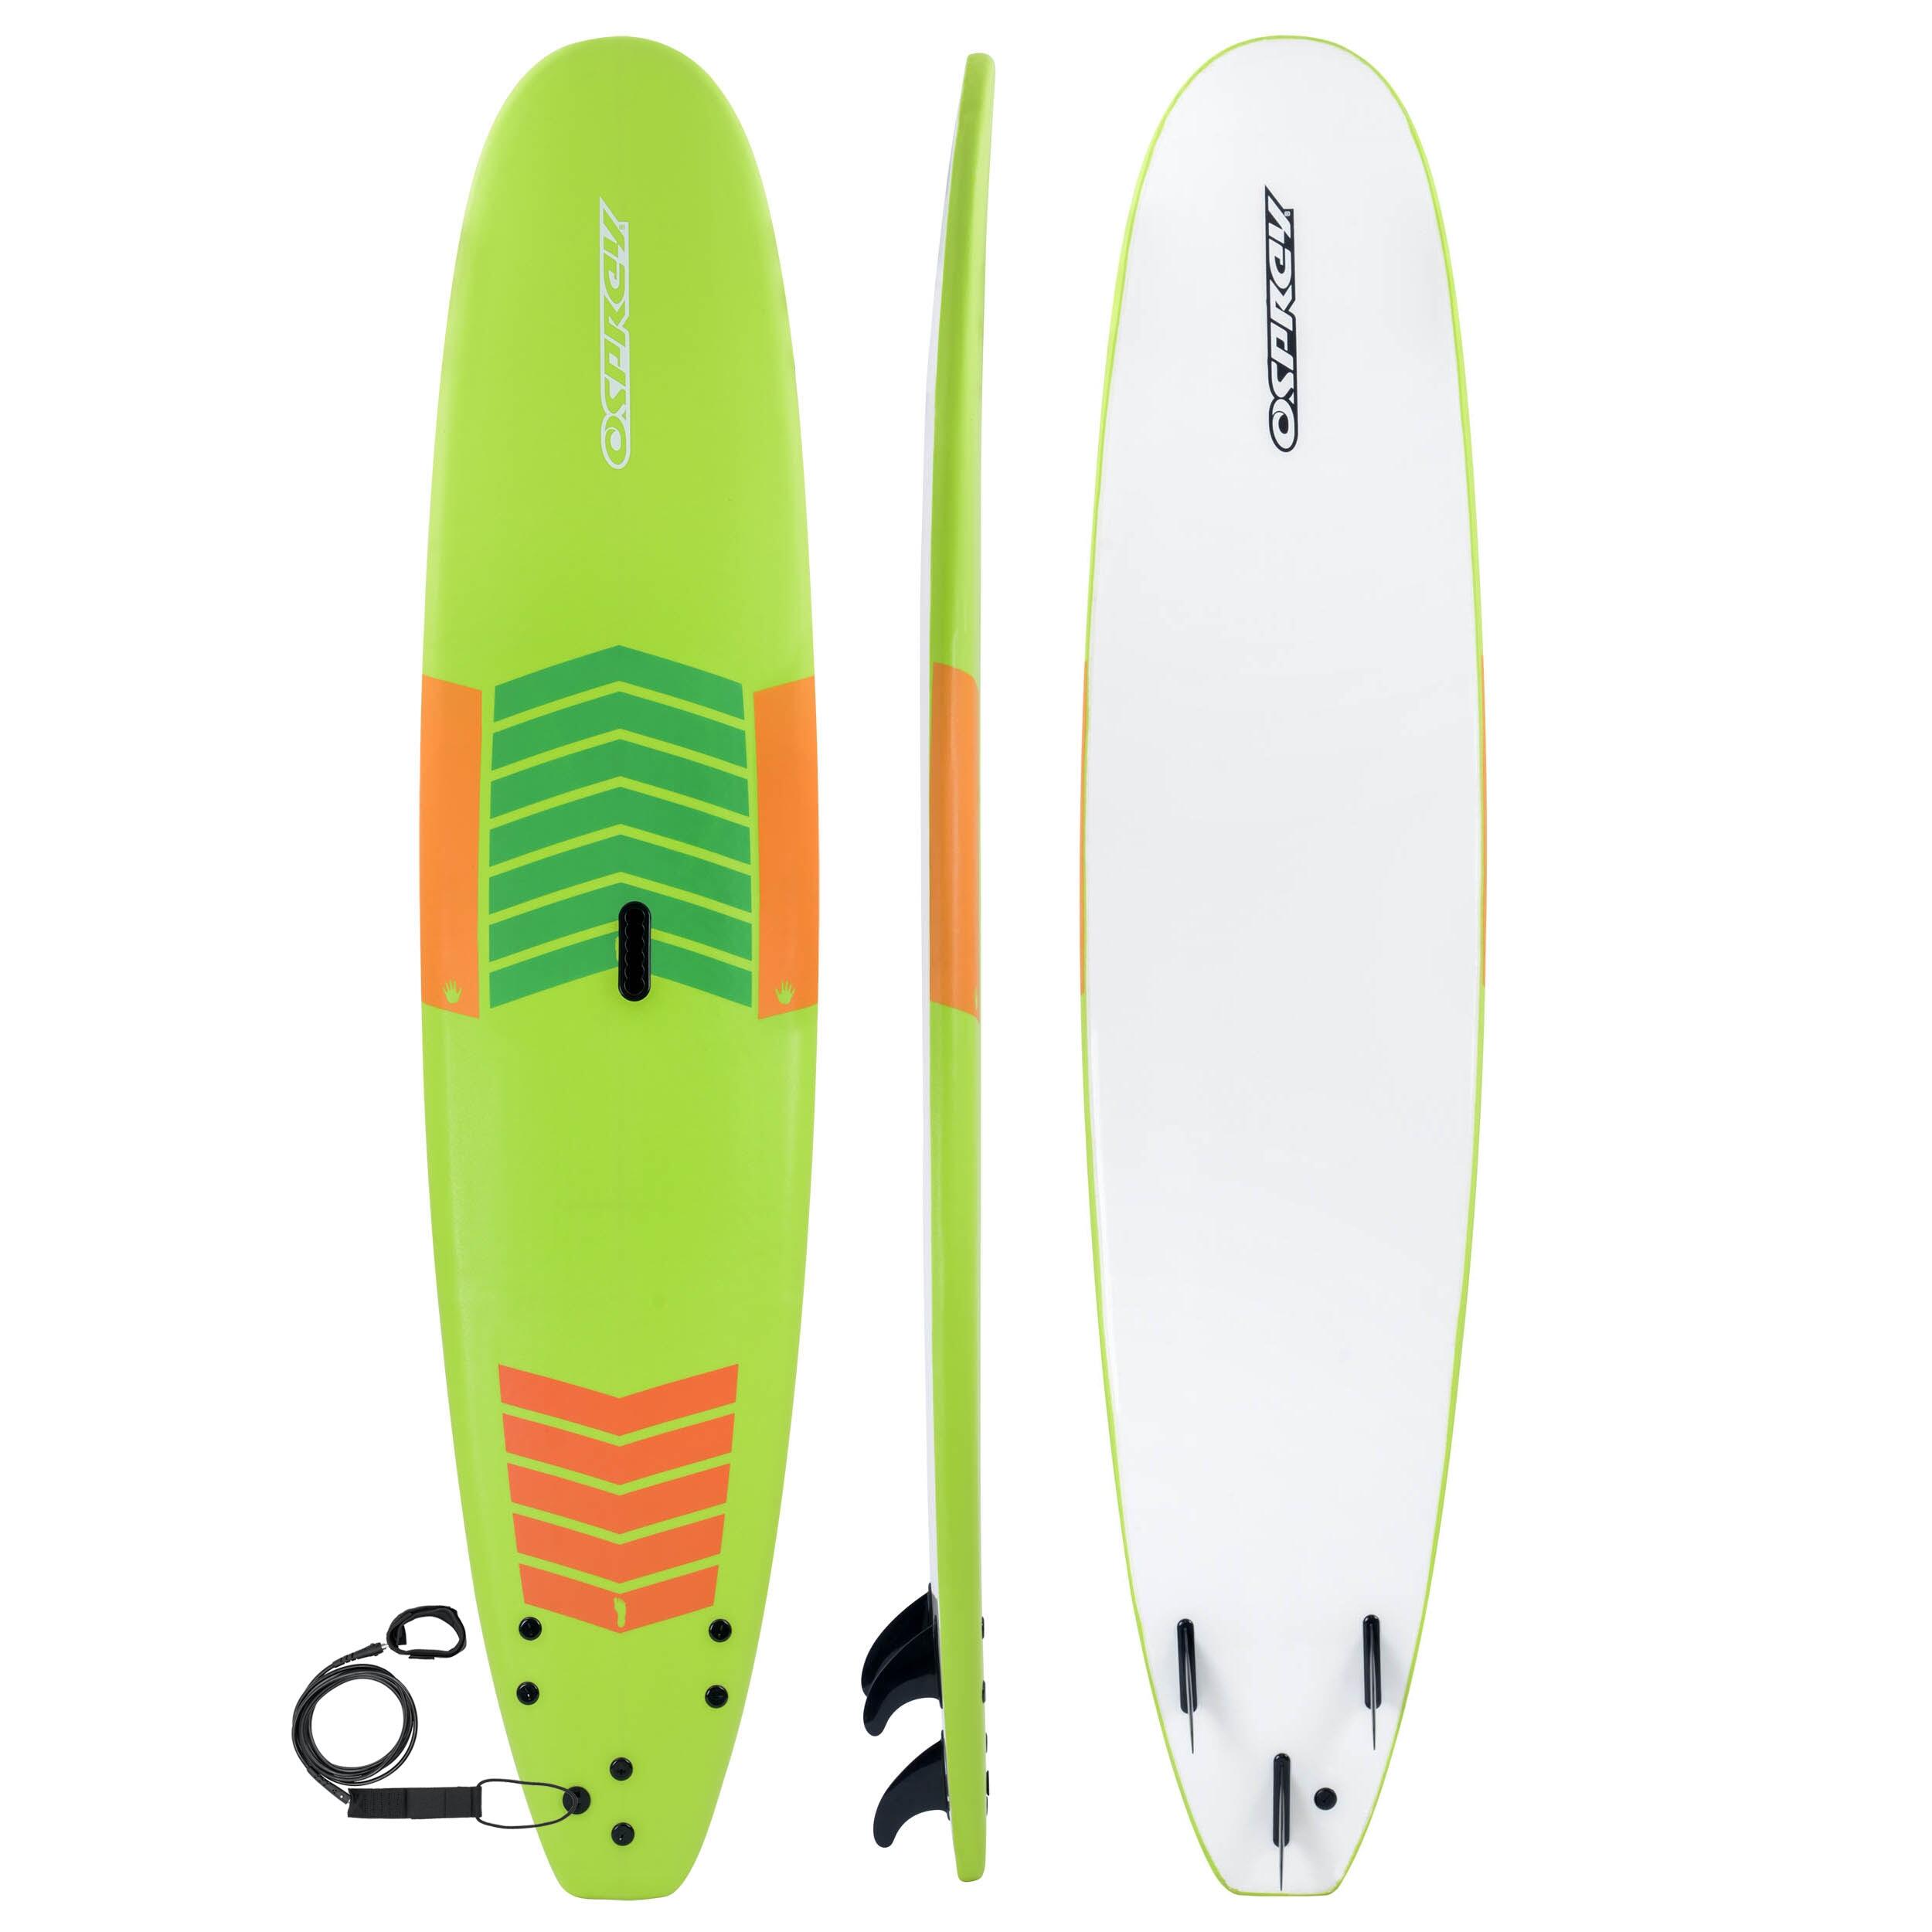 OSPREY ACTION SPORTS XPE Foam Surfboard with Leash and Fins, Green Design